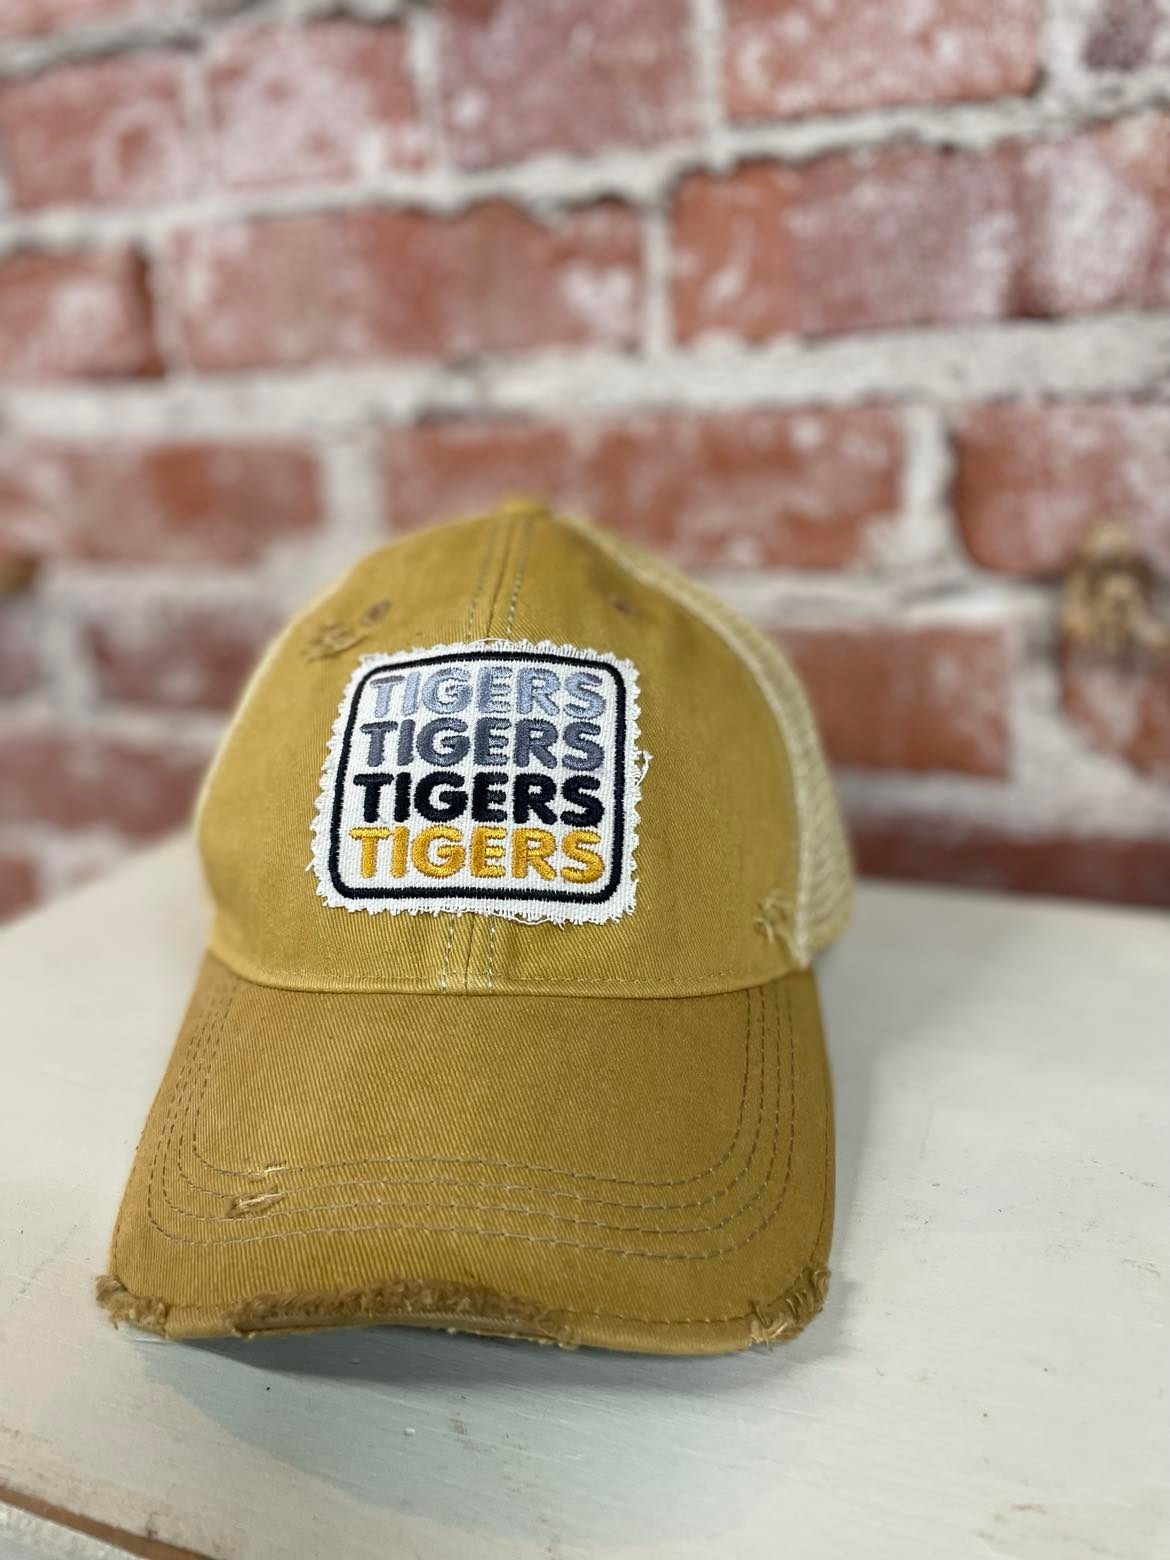 Tigers yellow hat